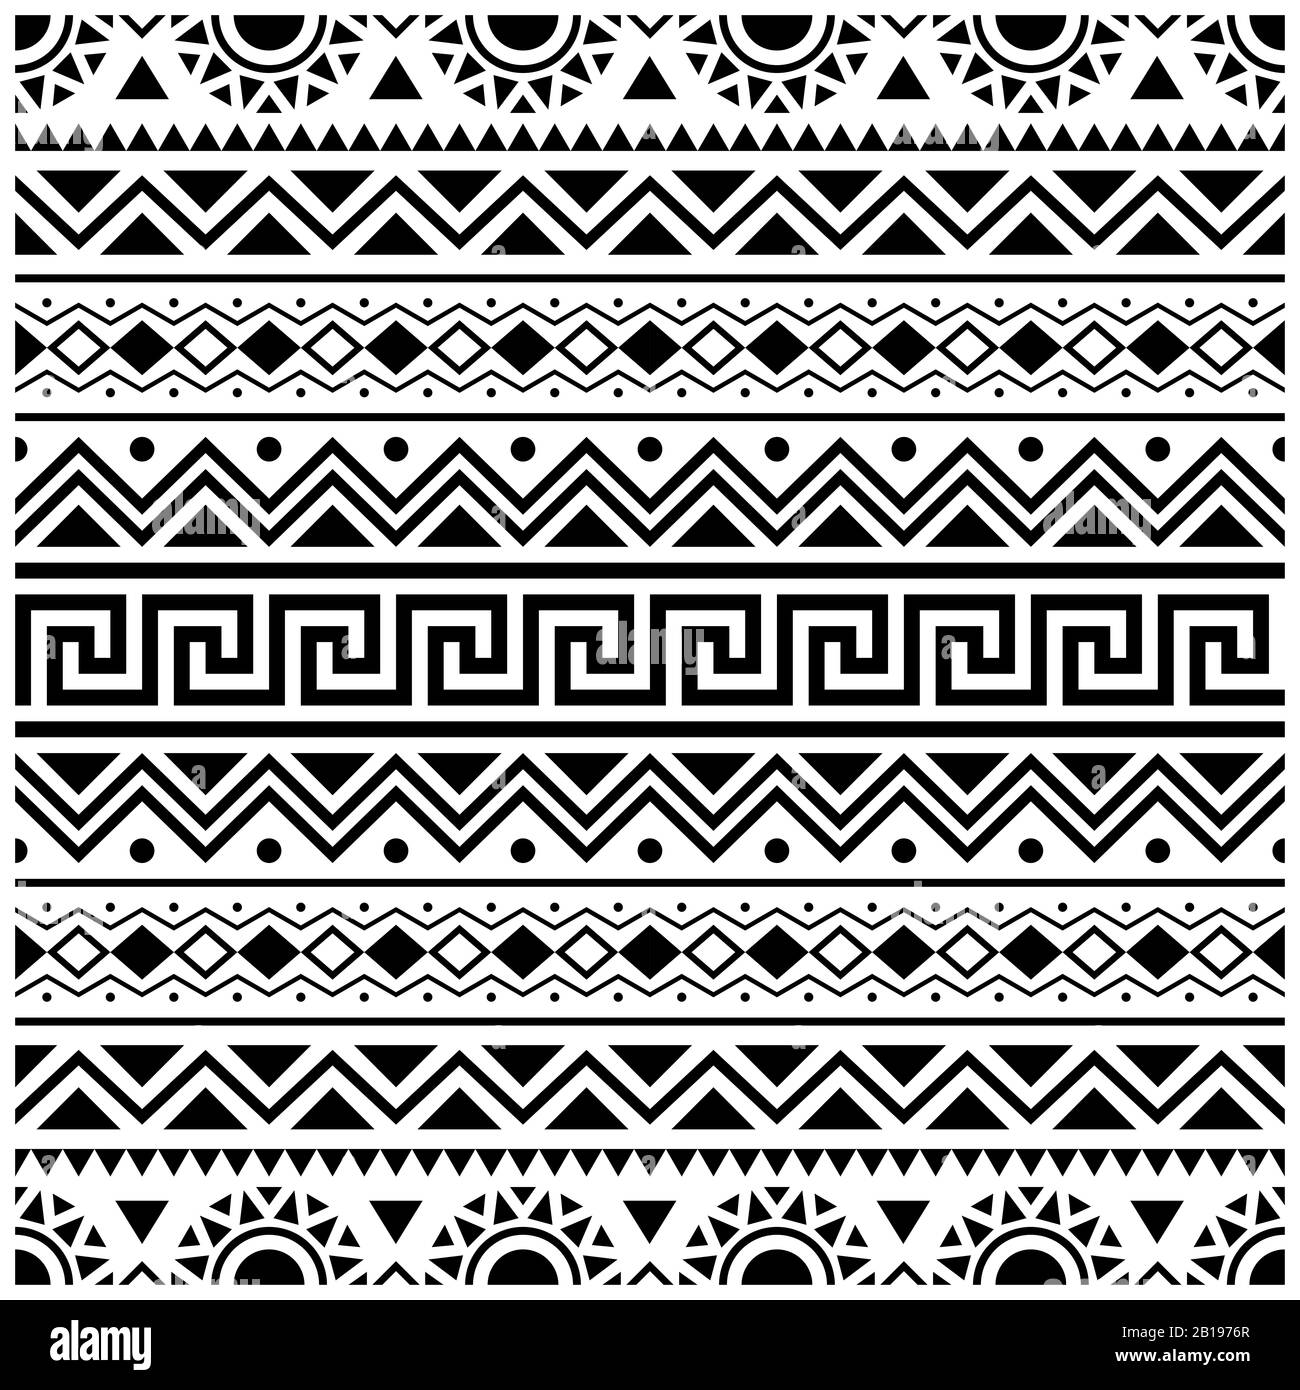 Stripe pattern Black and White Stock Photos & Images - Alamy